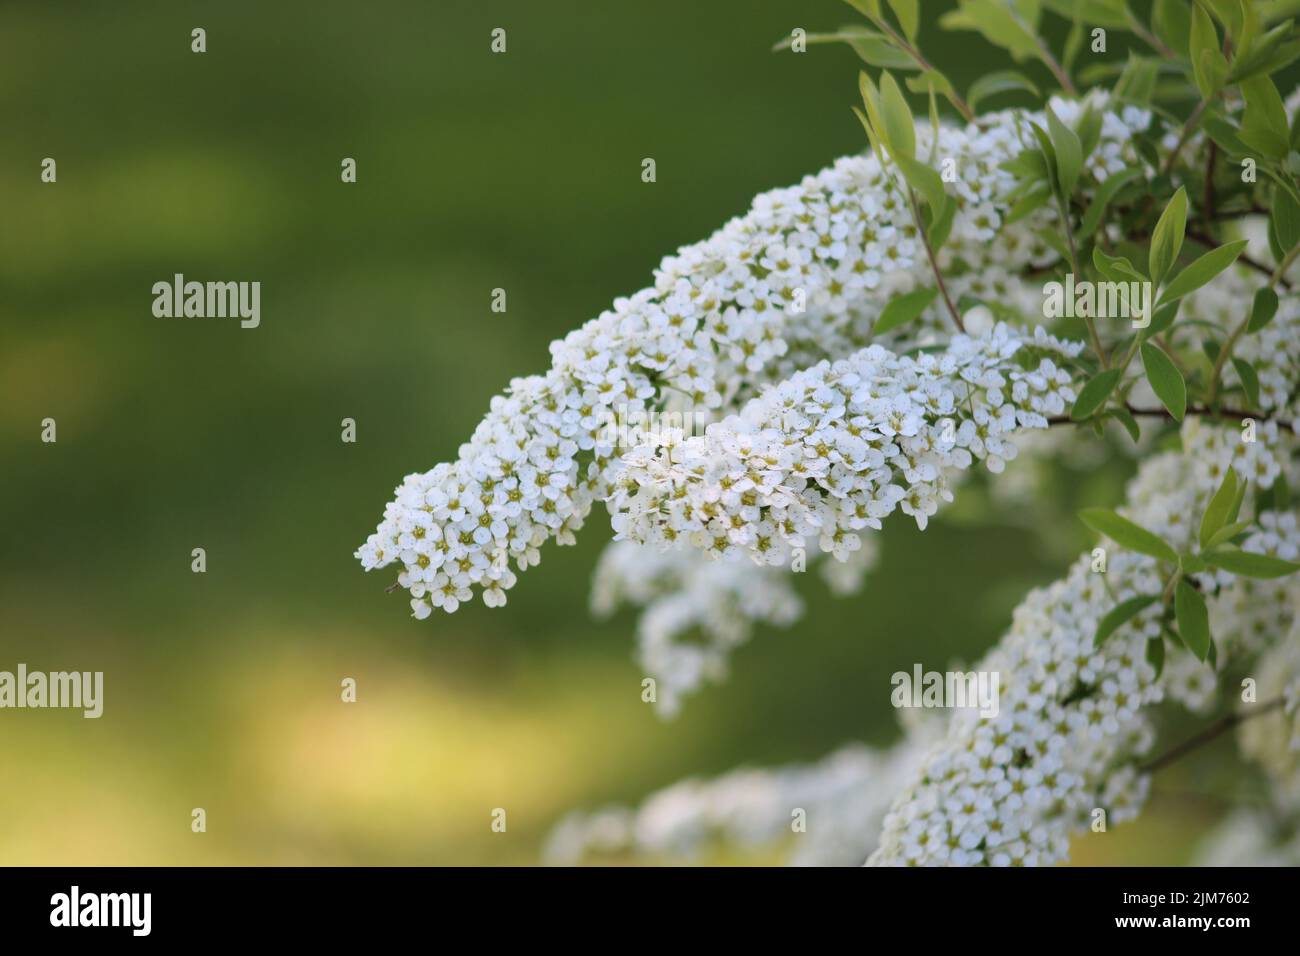 A closeup shot of spiraea and cinereas on the blurry background Stock Photo